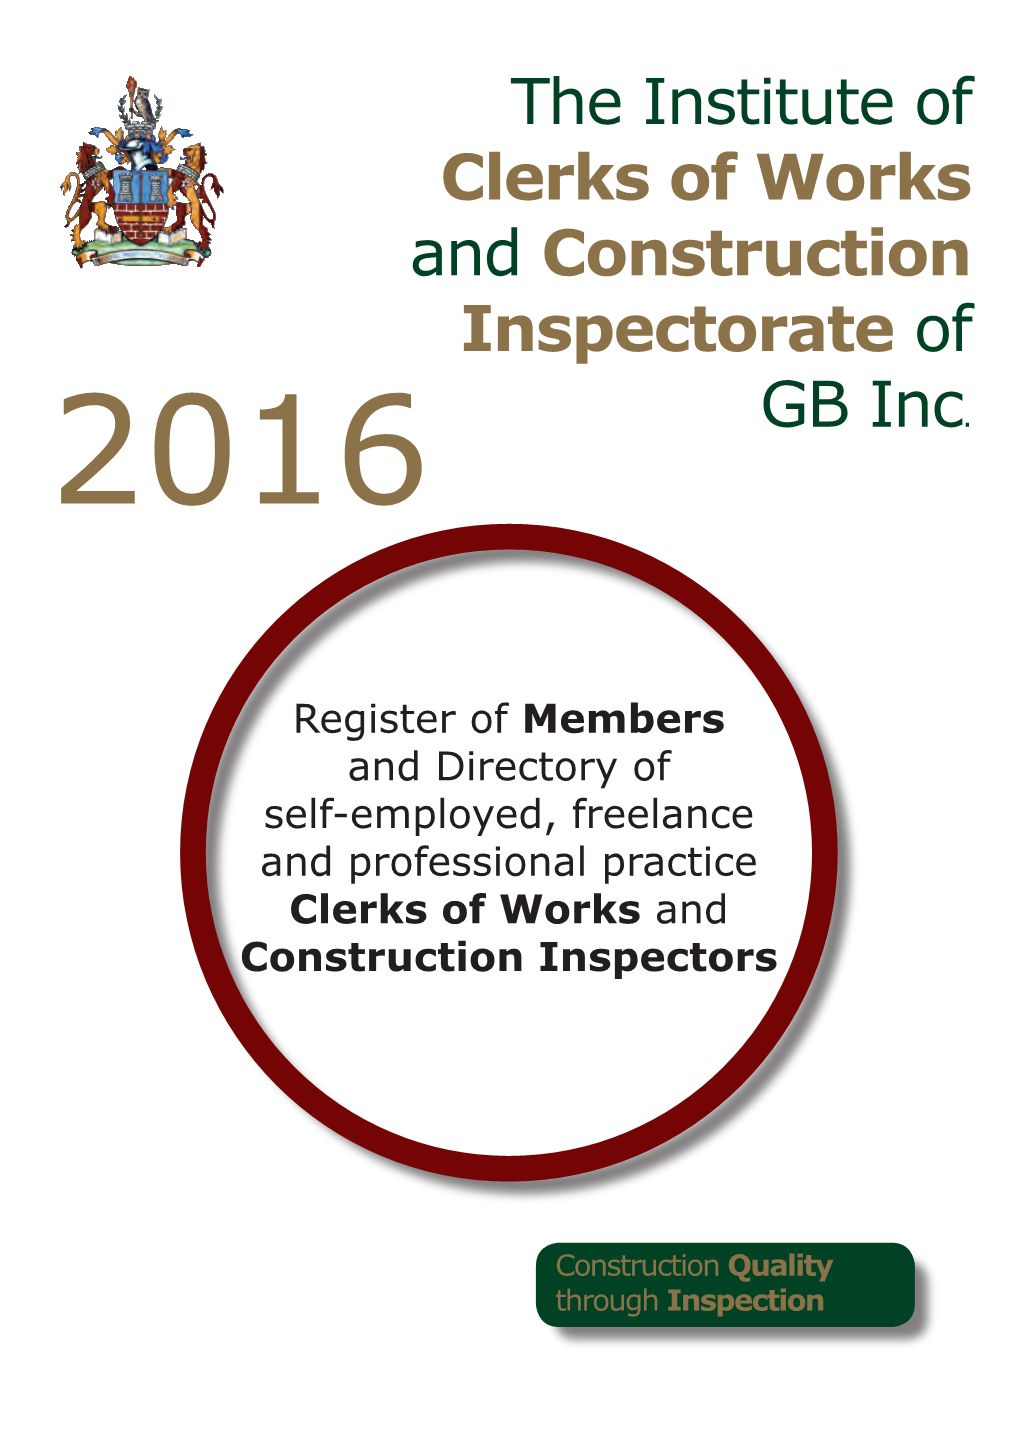 The Institute of Clerks of Works and Construction Inspectorate of GB Inc